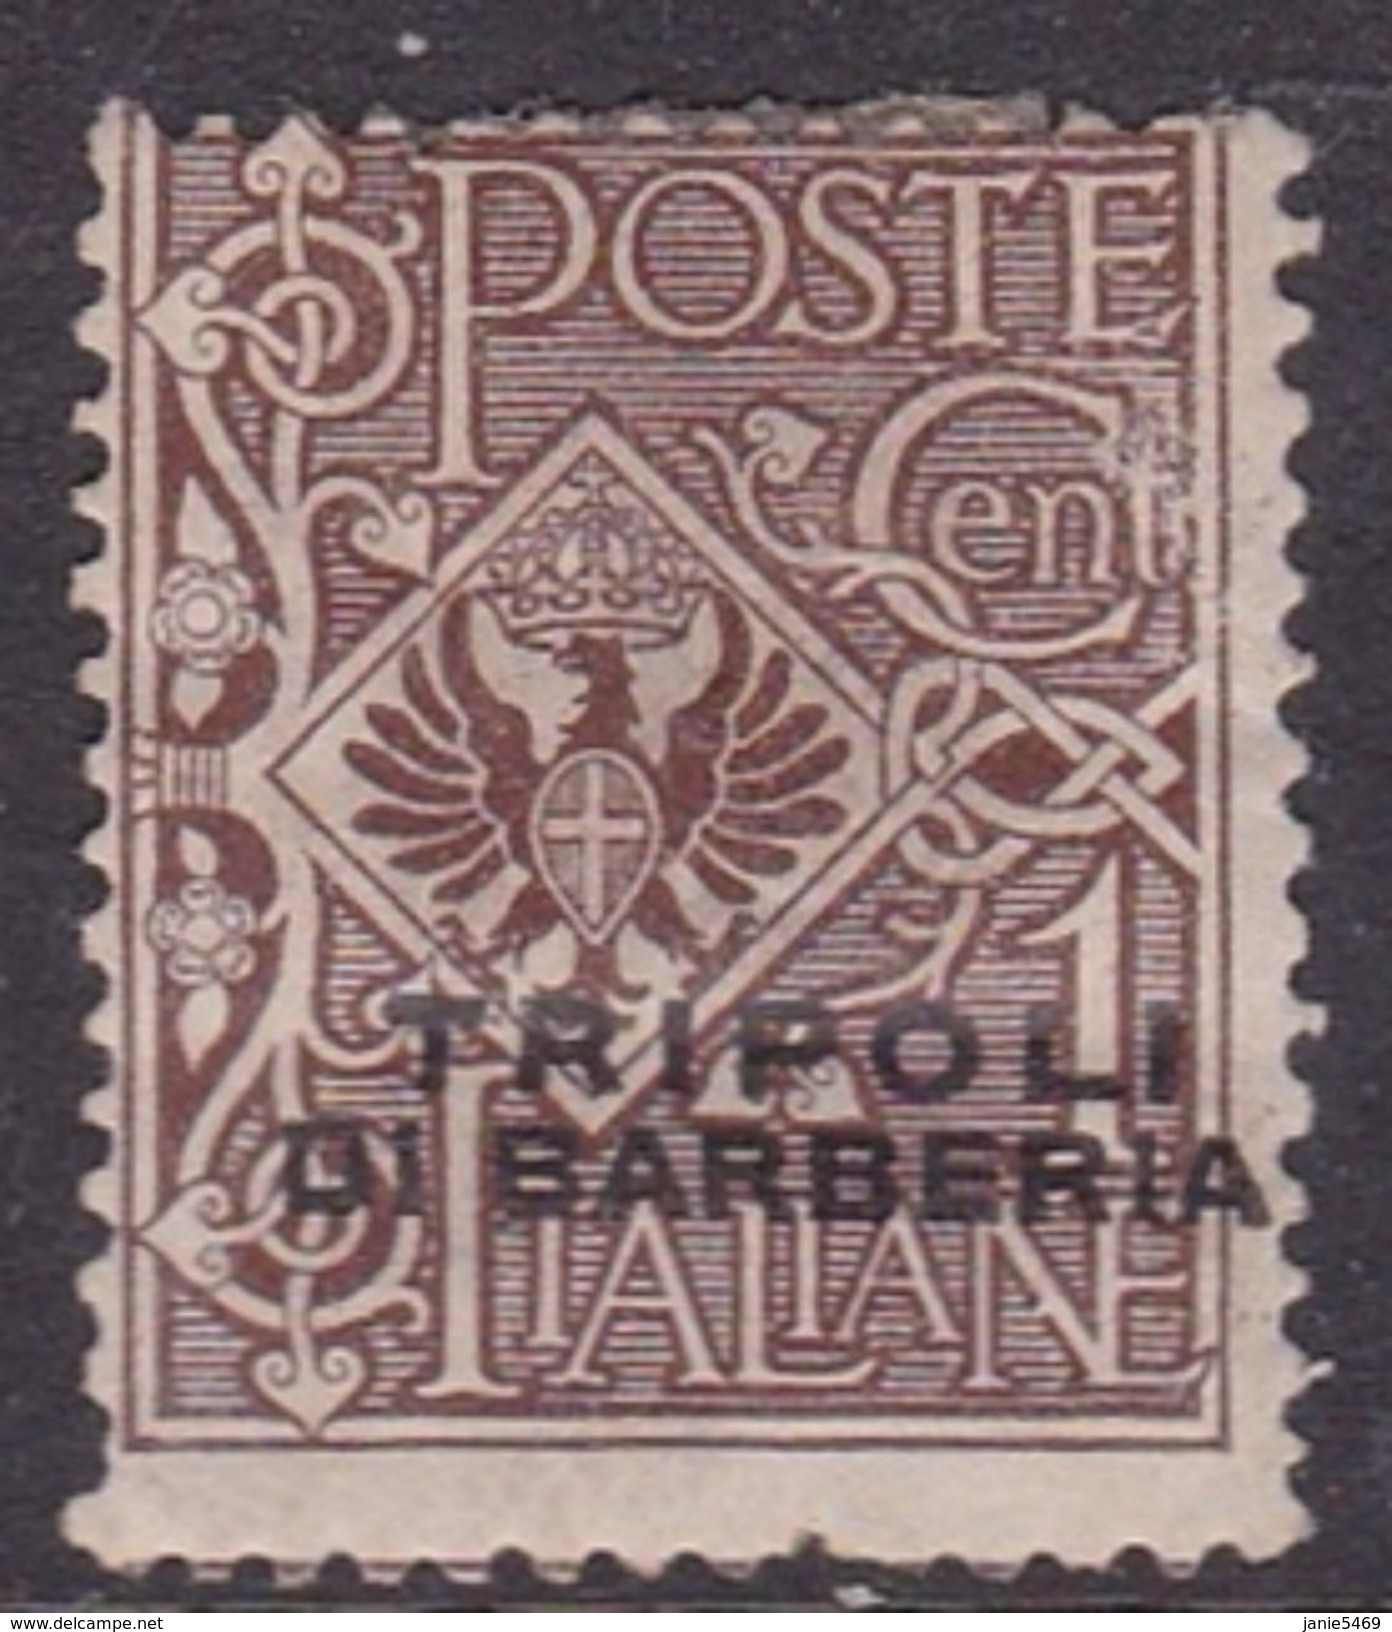 Italian Post Offices In The Levant, Tripoli Di Barberia S 11 1915 1c Brown, Mint Hinged - General Issues